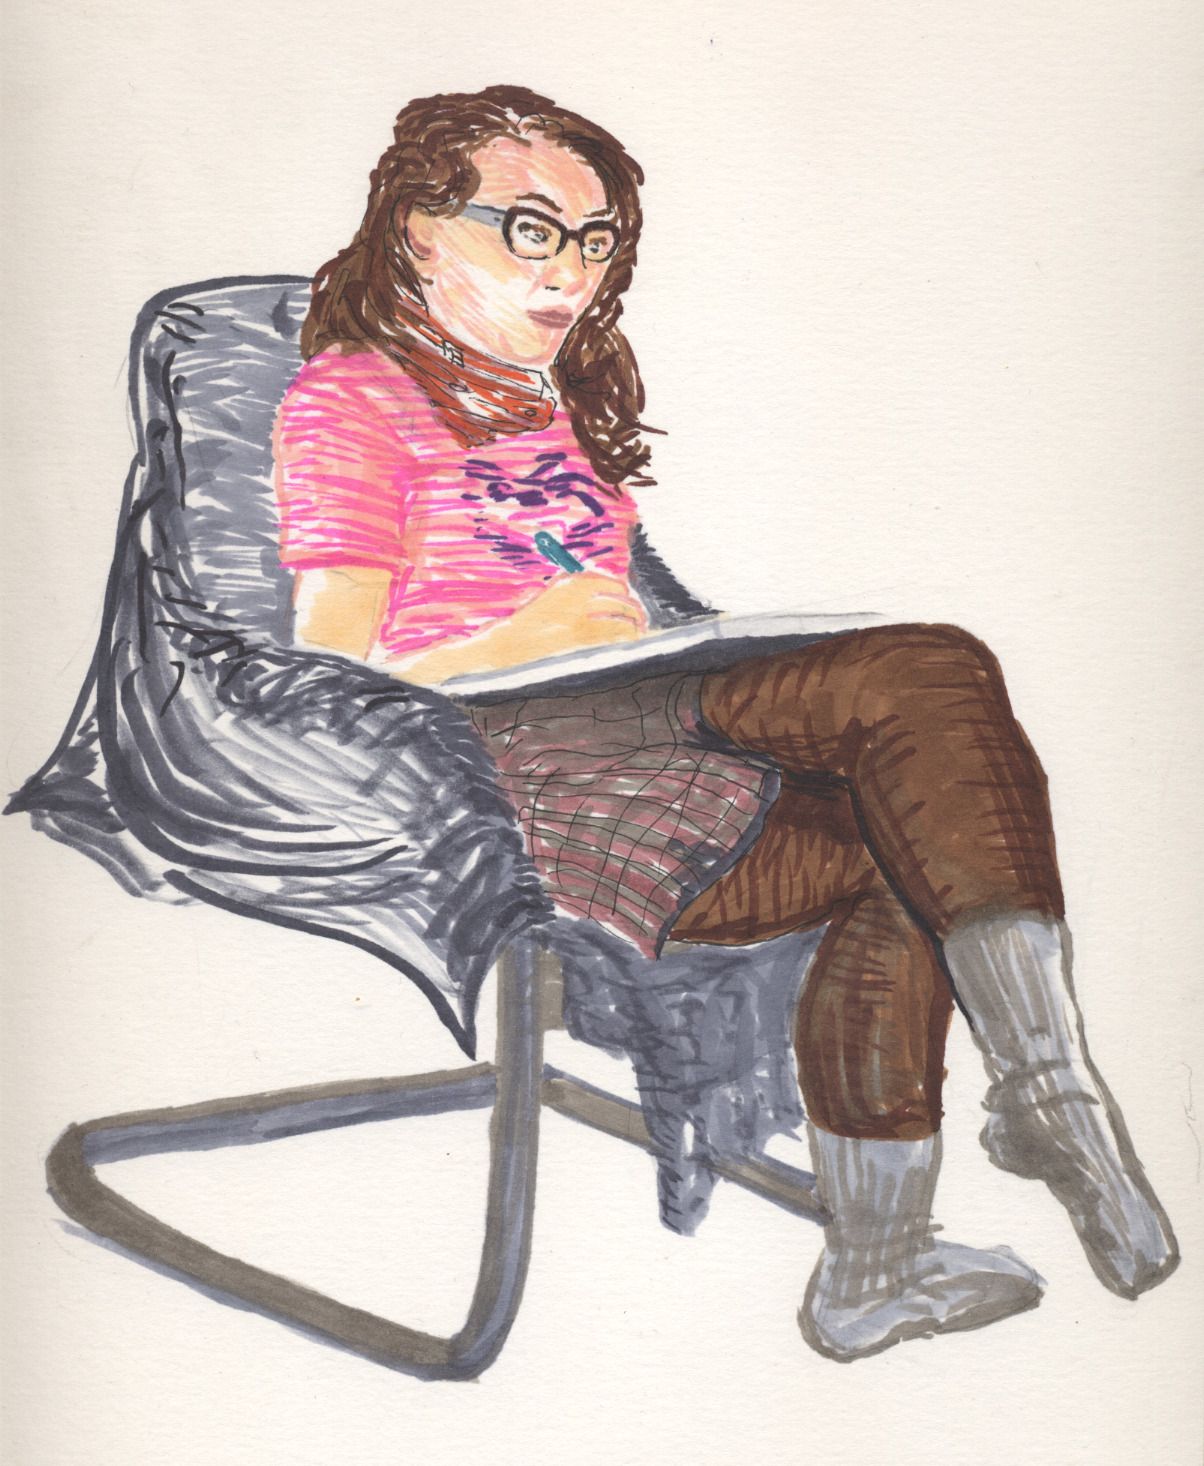 Caitlin Thompson, marker drawing, circa 2011 I had an Idea for a zine once that revolved